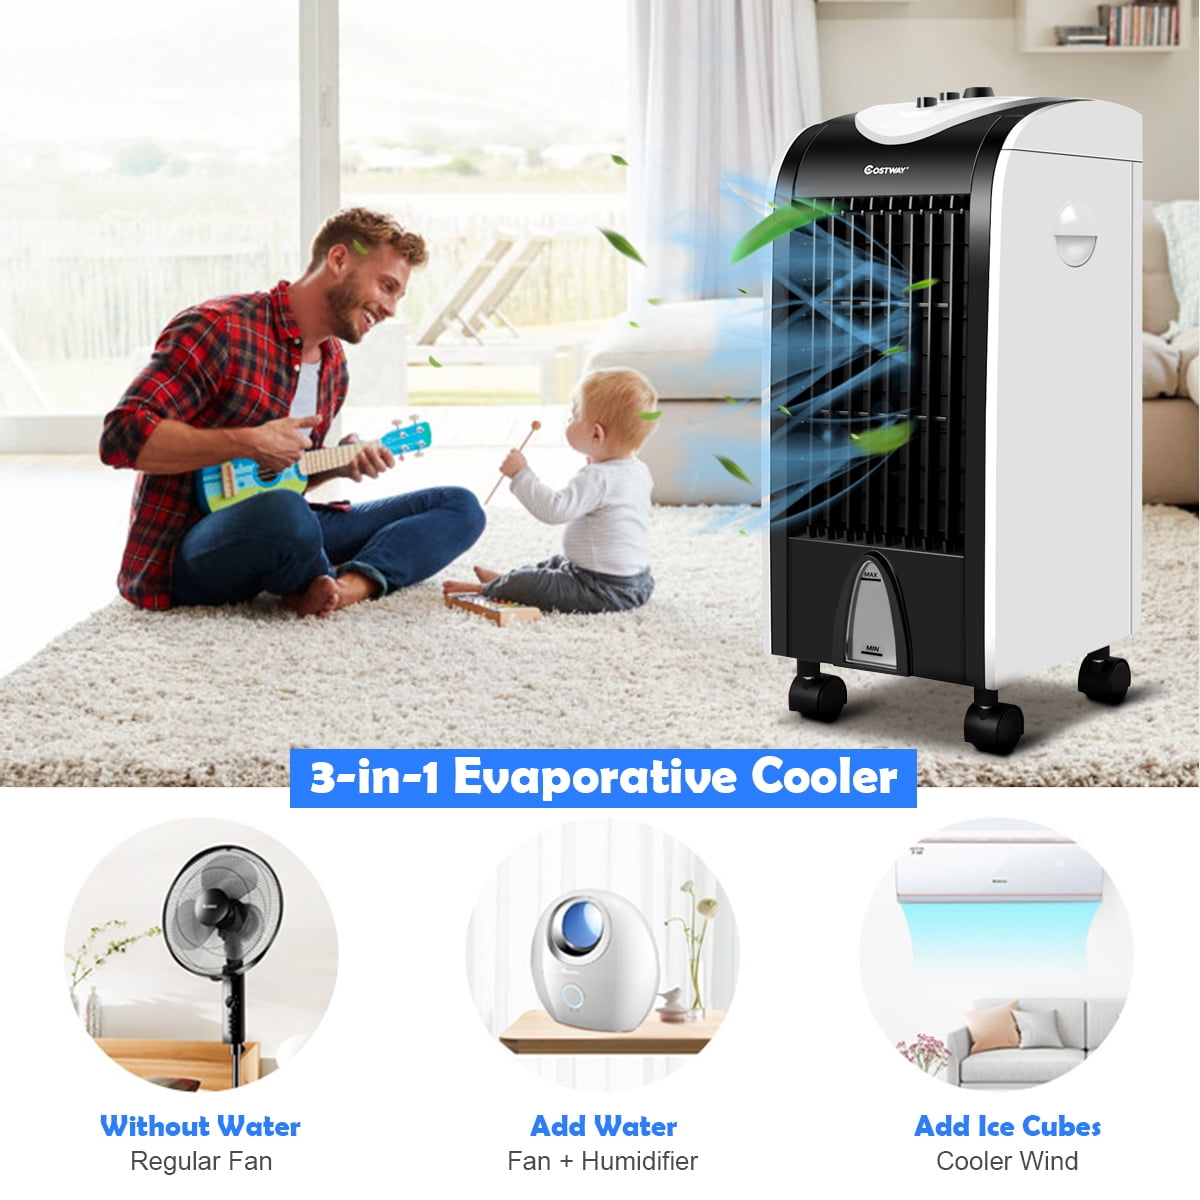 Travel Portable Air Conditioner Evaporative Coolers/Humidifier/Purifier Car Dorm Bedroom Home Camp 3 Wind Speeds Songway Personal Mini Air Cooler with 7 Colors LED USB Mini Fan for Office 